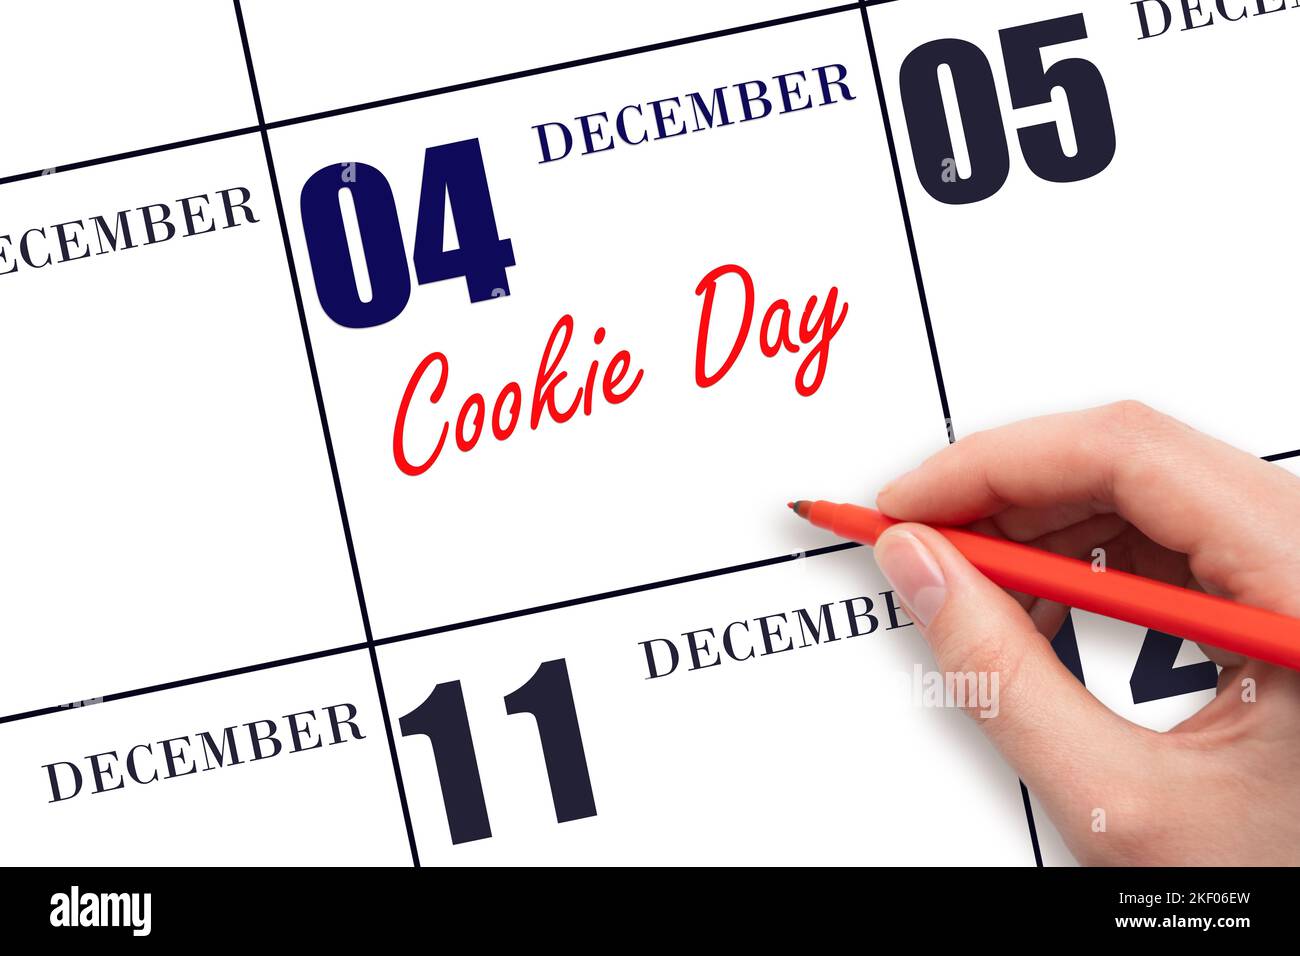 December 4th. Hand writing text Cookie Day on calendar date. Save the date. Holiday. Day of the year concept. Stock Photo